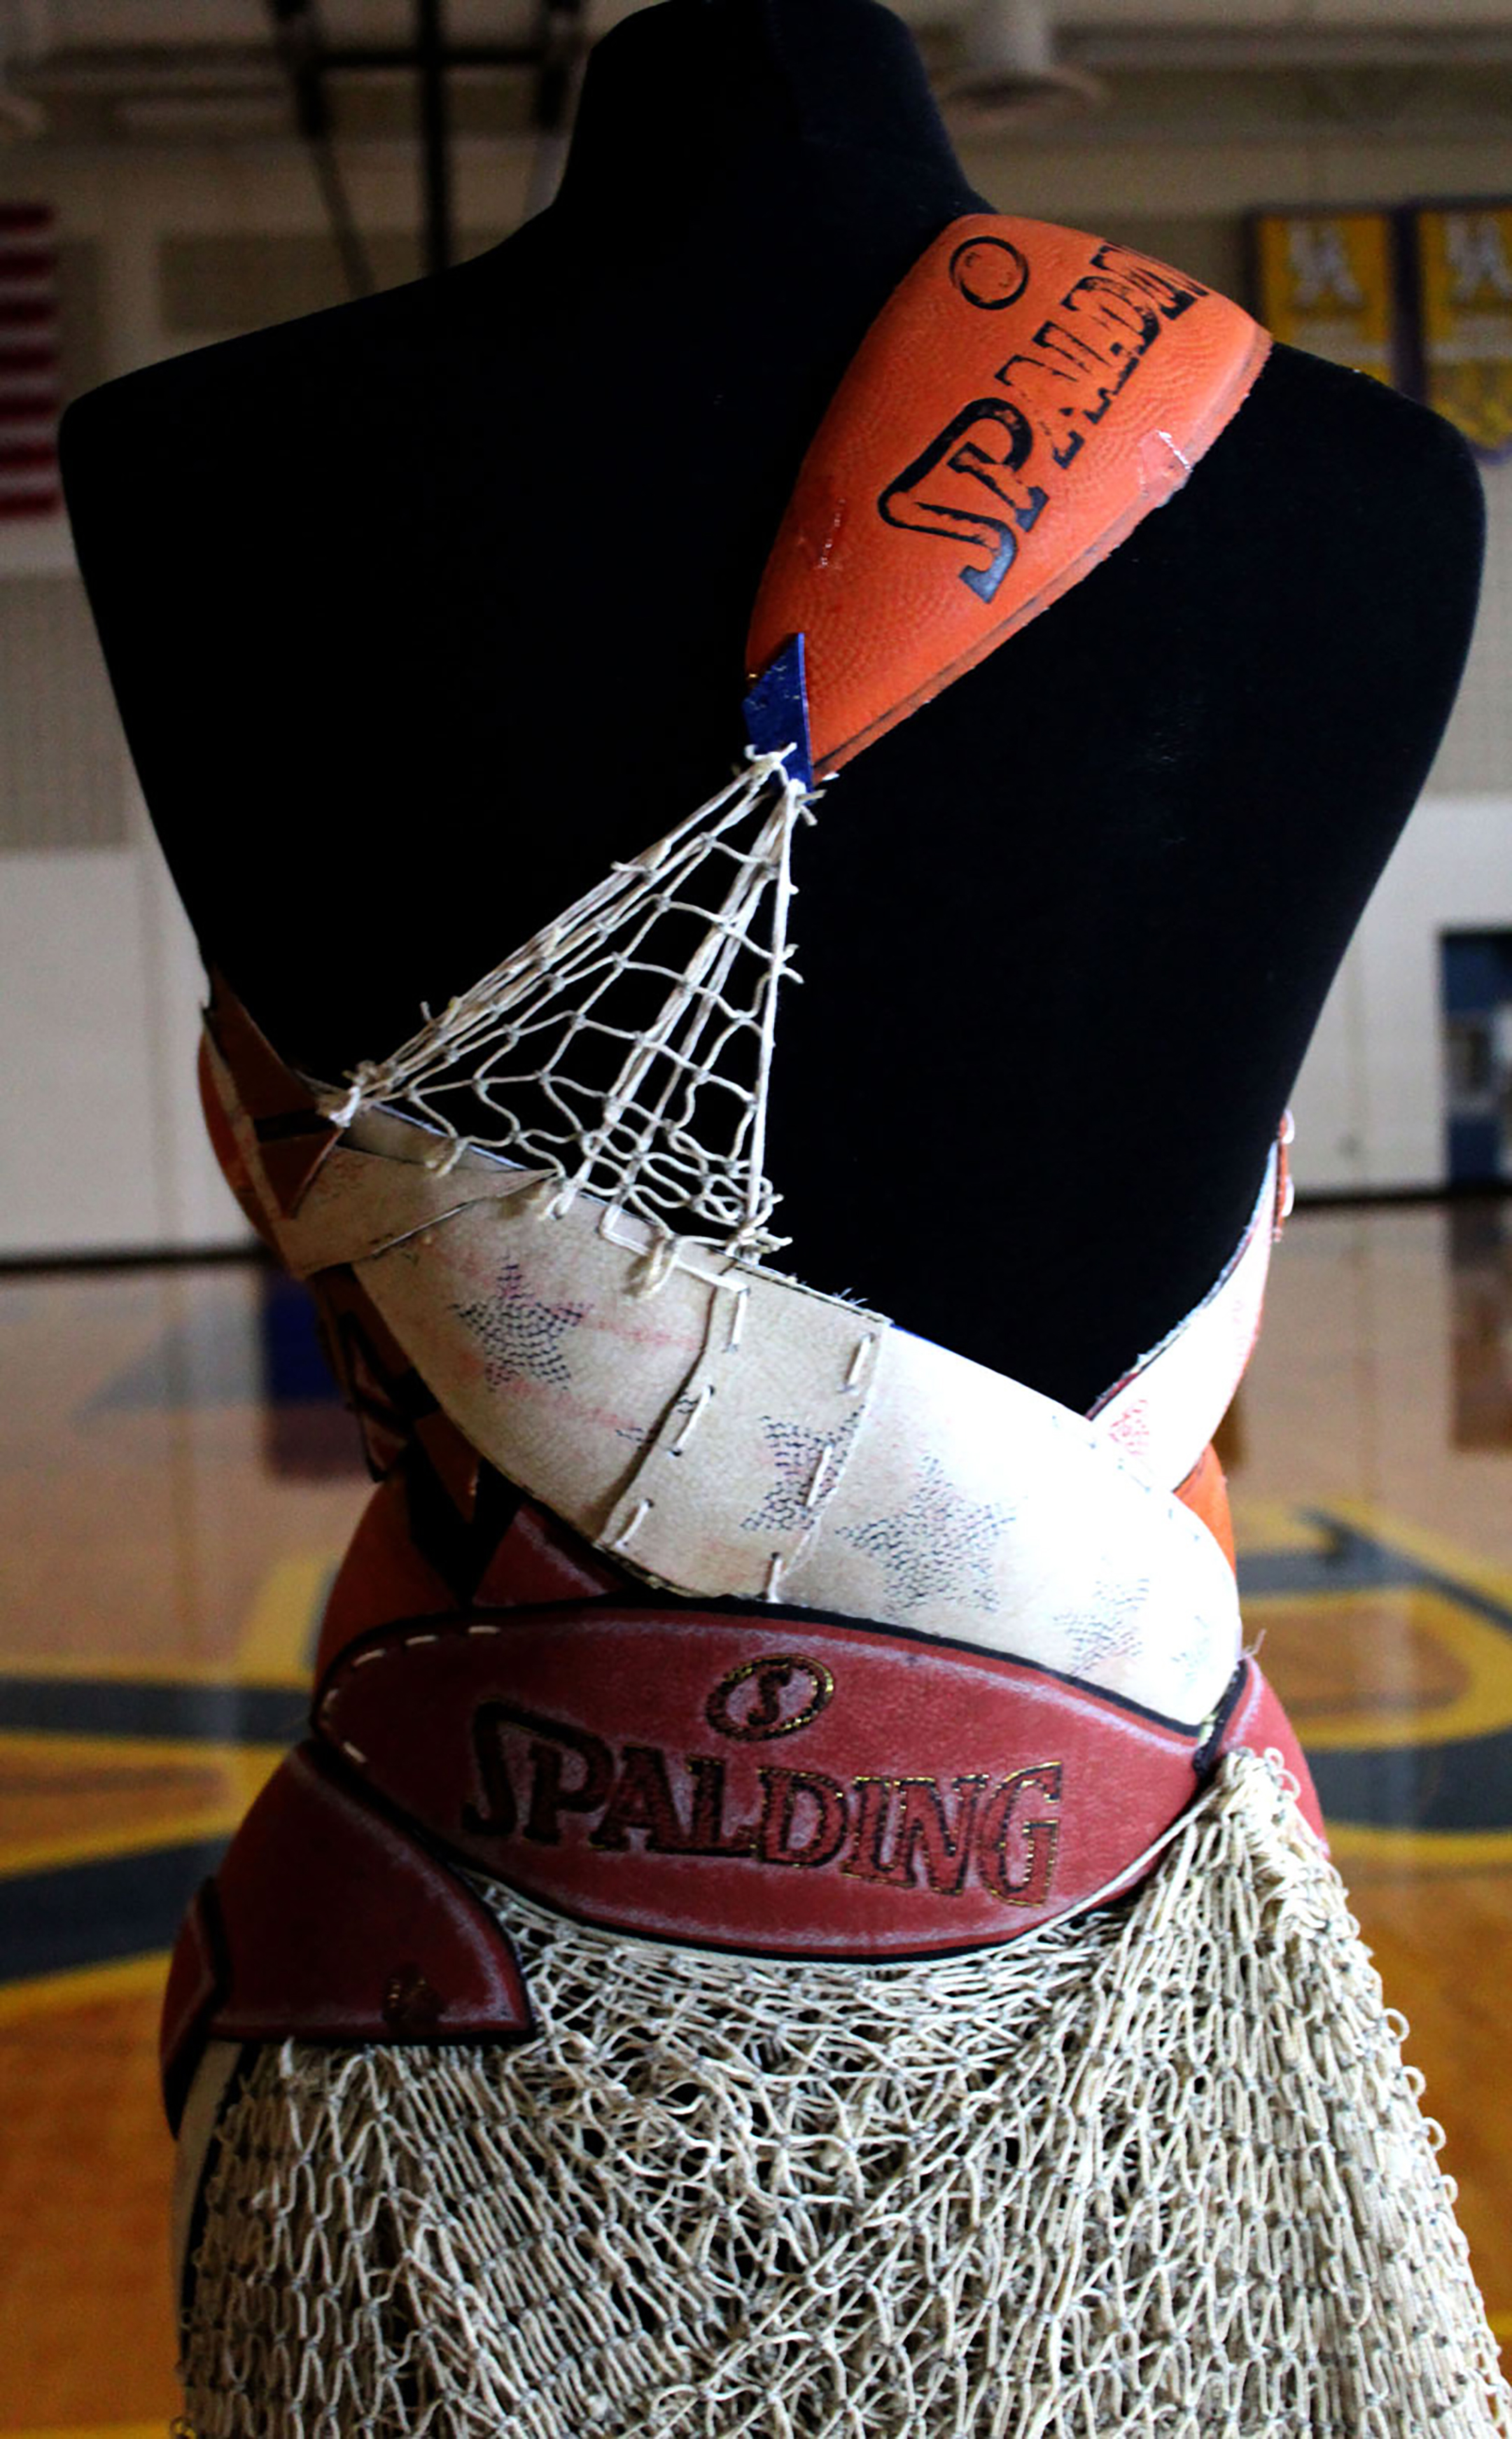 Detail of a dress made out of old basketballs and netting, showing the upper body of the dress with a shoulder strap made out of a basketball